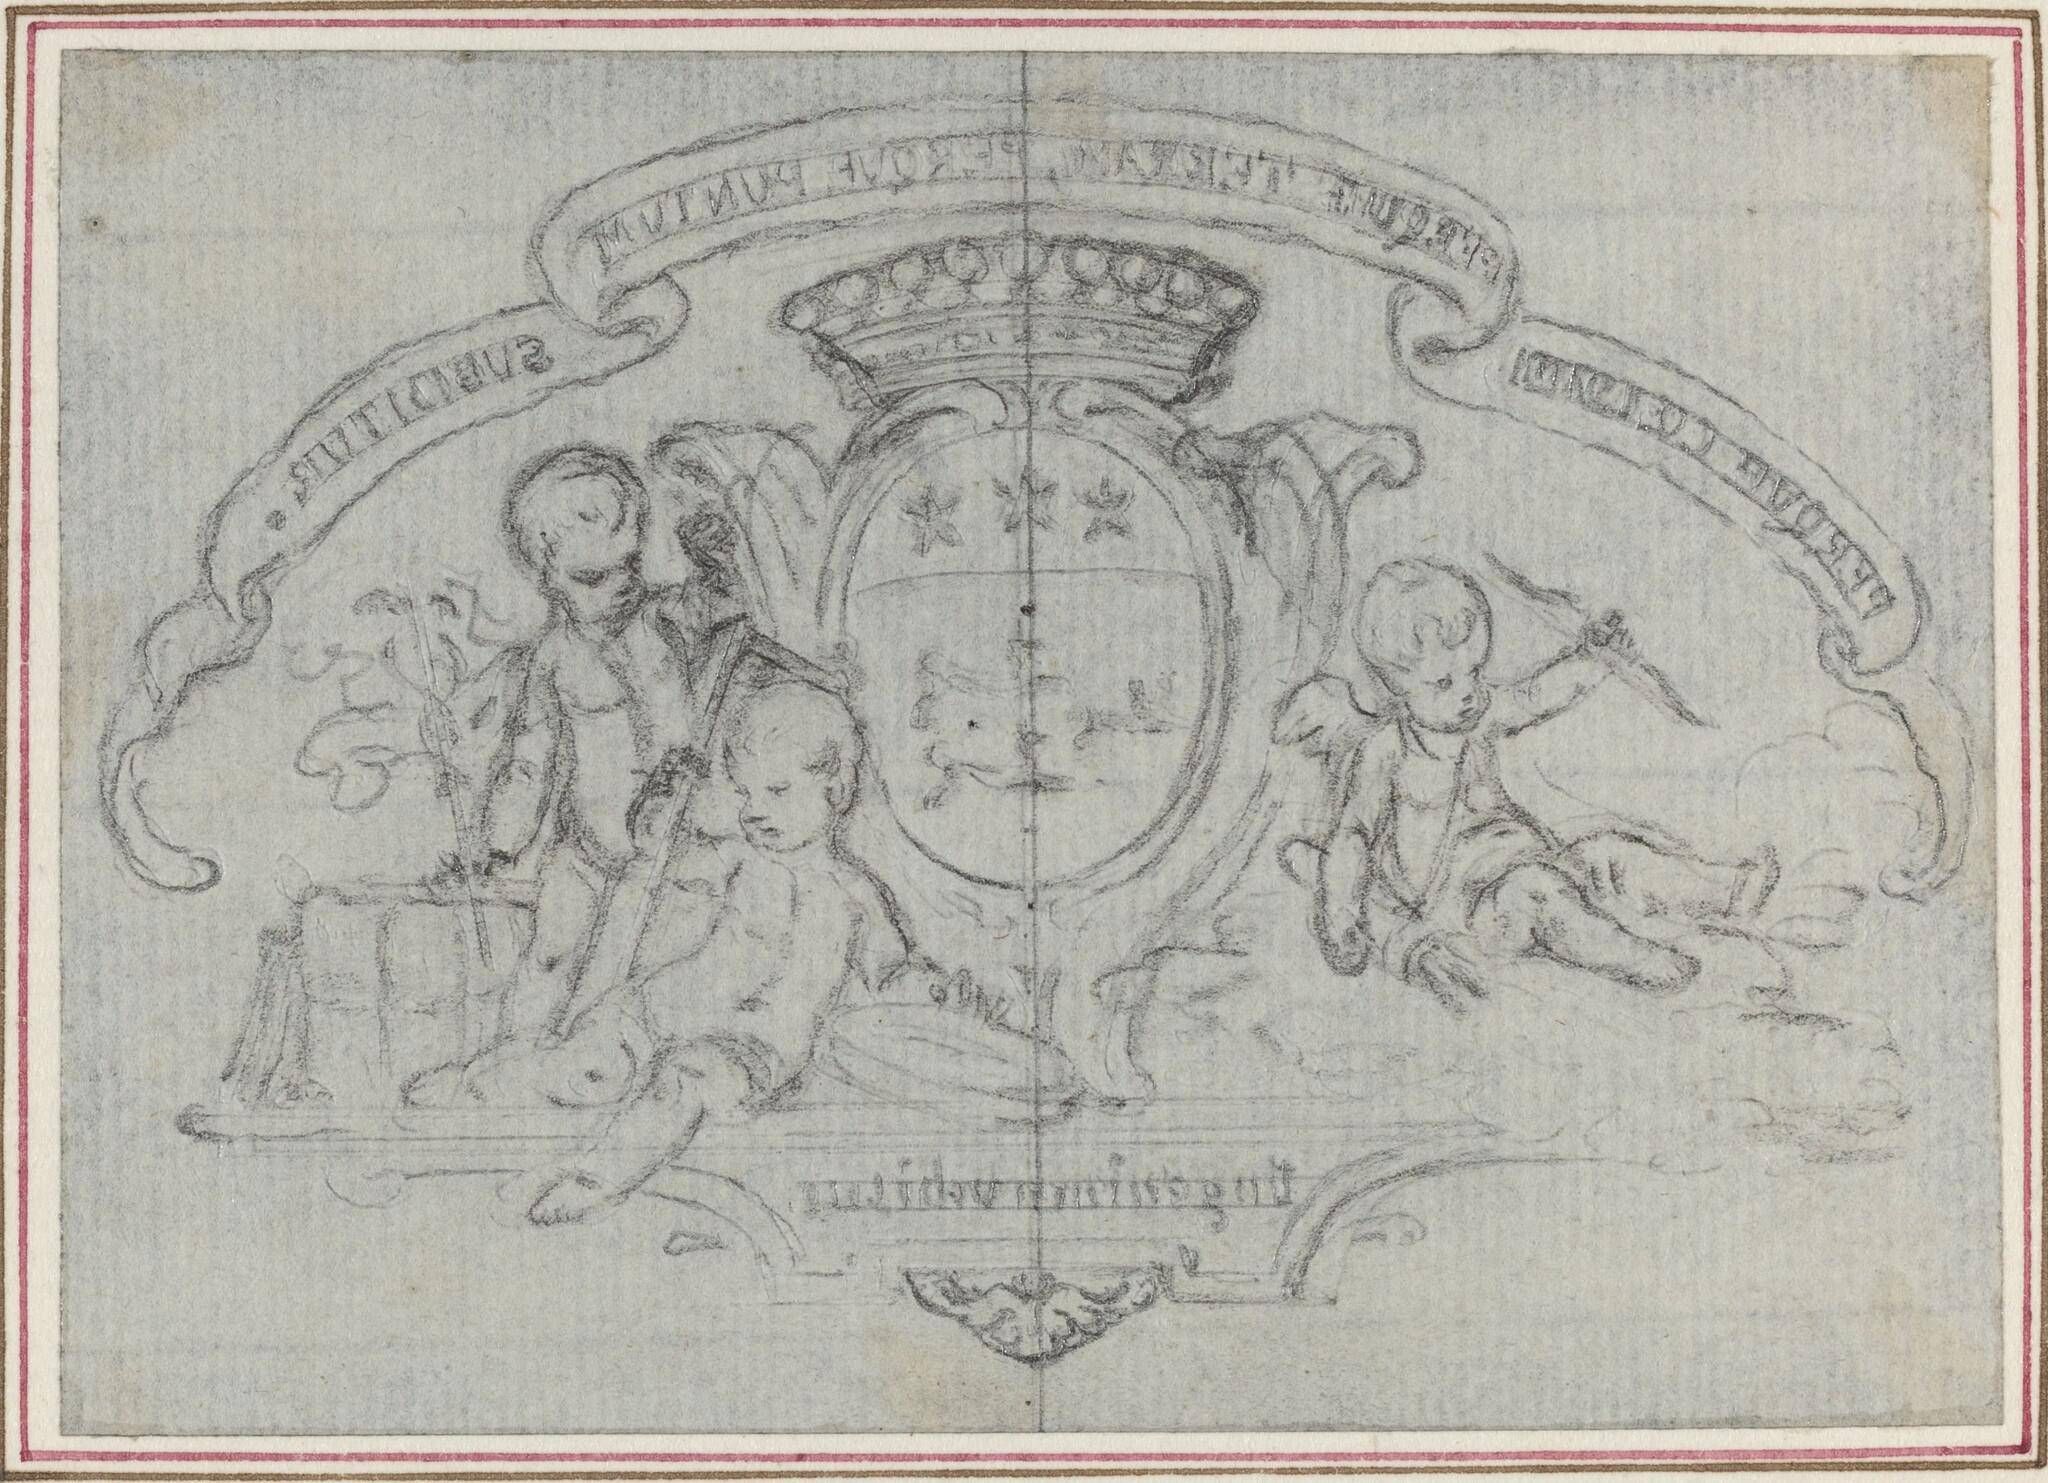 Coat of Arms with Three Putti